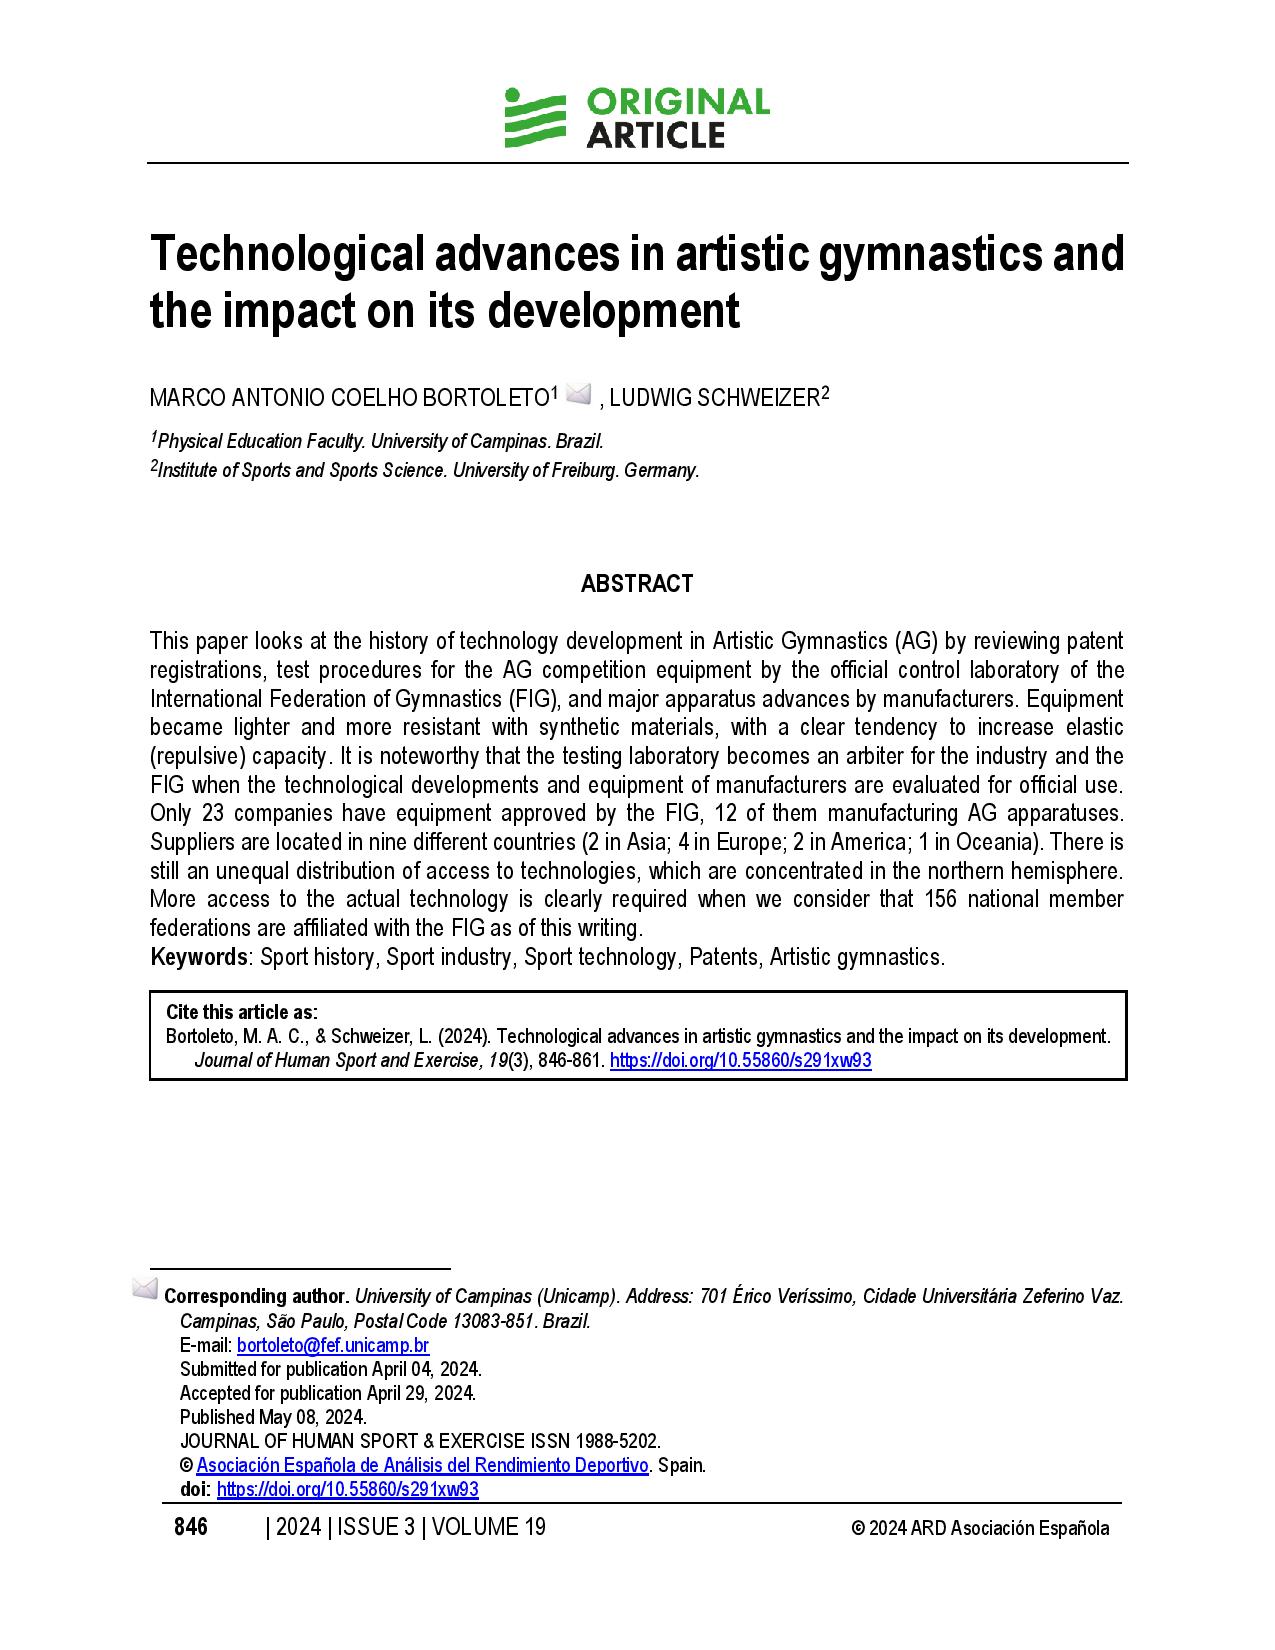 Technological advances in artistic gymnastics and the impact on its development